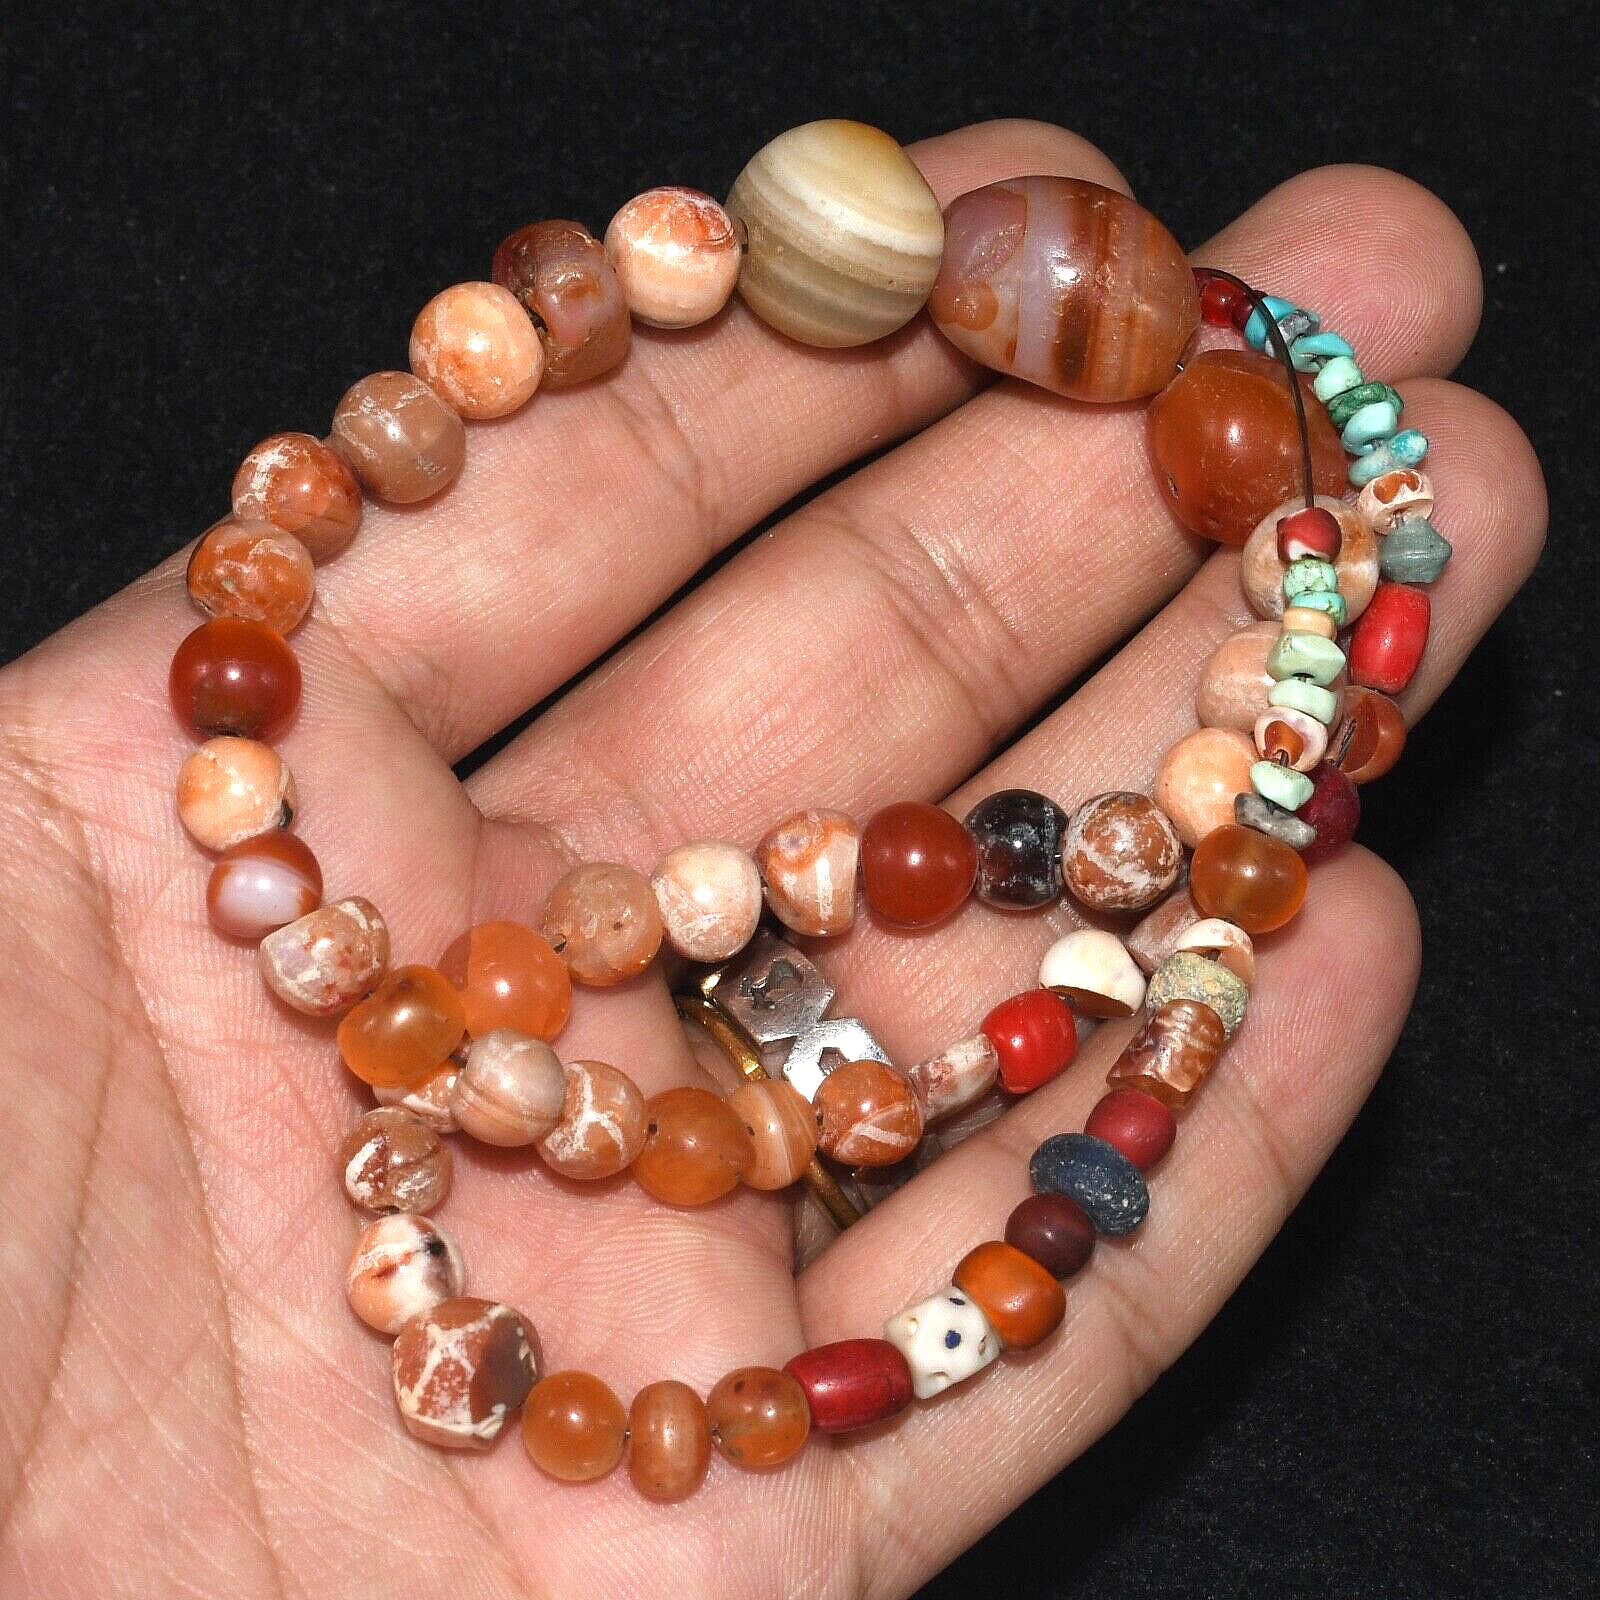 Ancient Carnelian Stone Bead Necklace with Bactrian Turquoise C. 1500+ Years Old